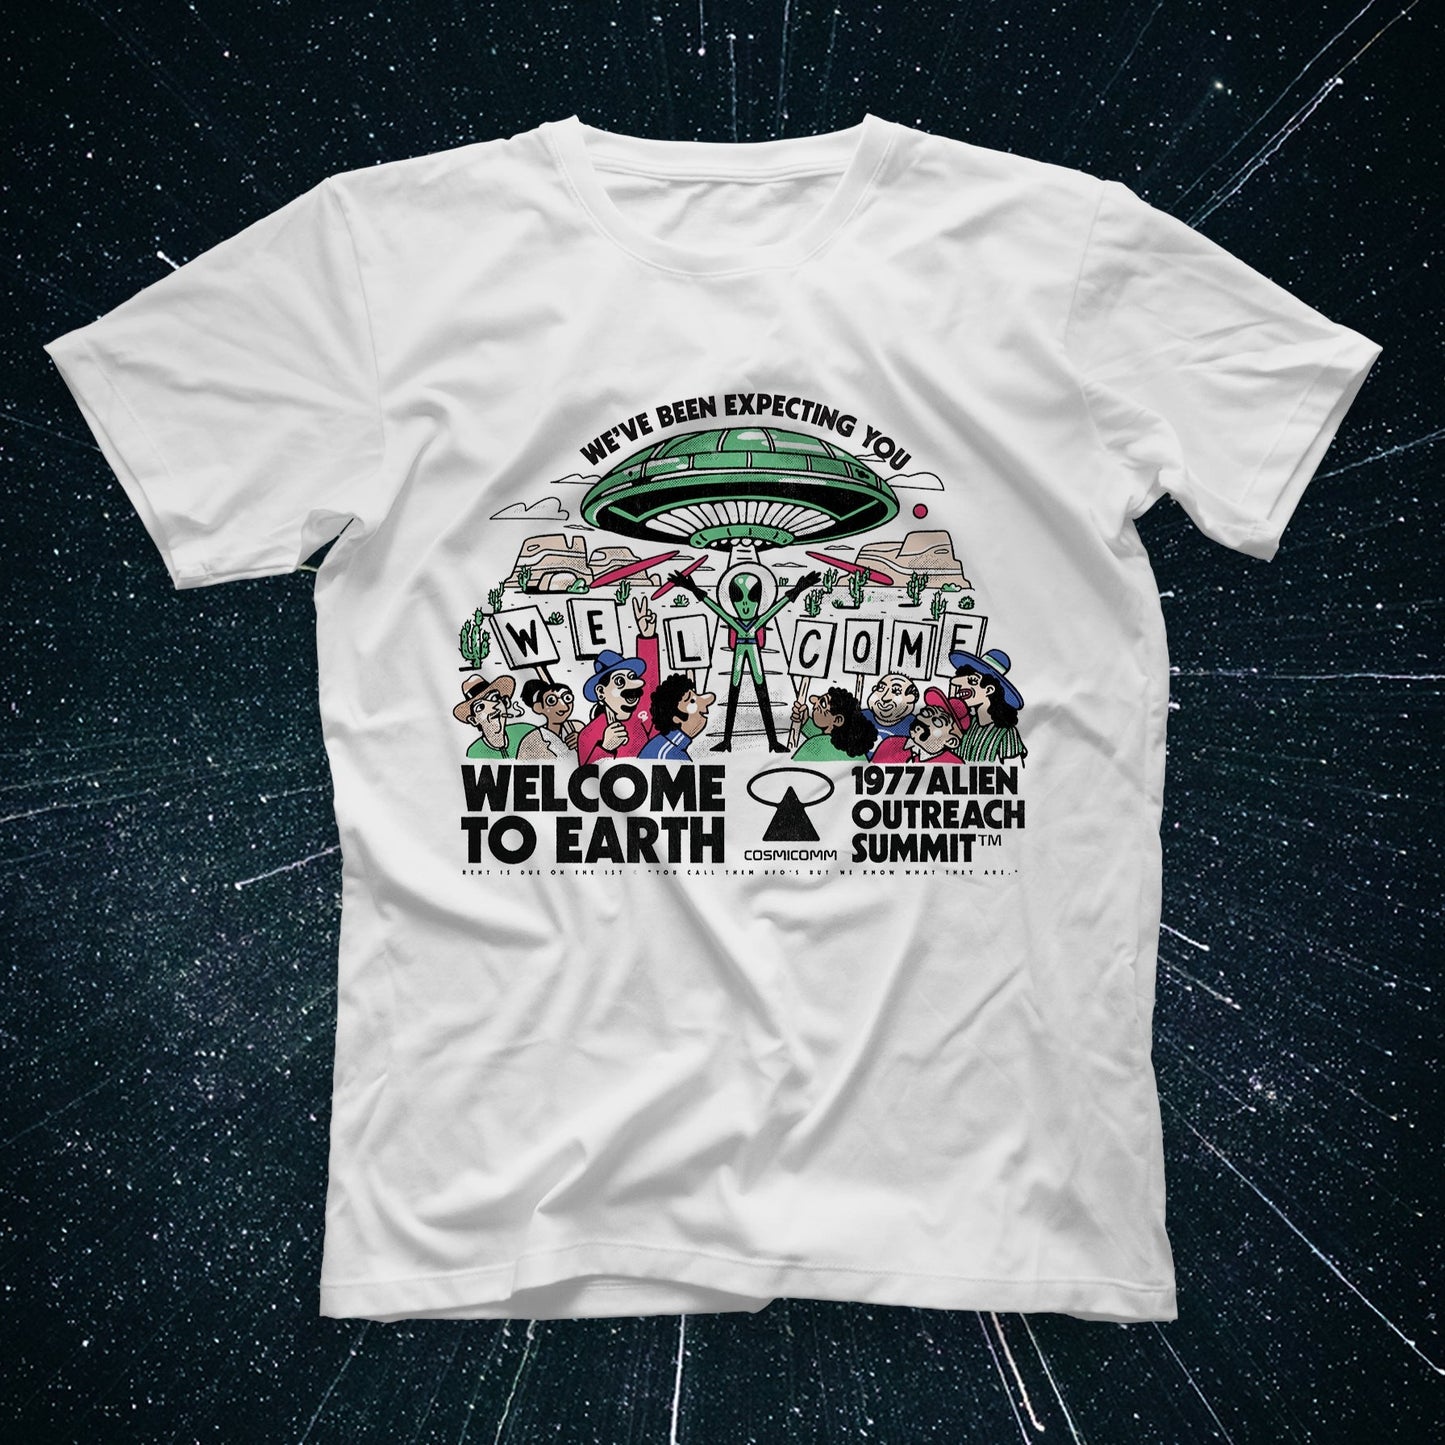 Welcome To Earth - 1977 Alien Outreach Conference T-Shirt